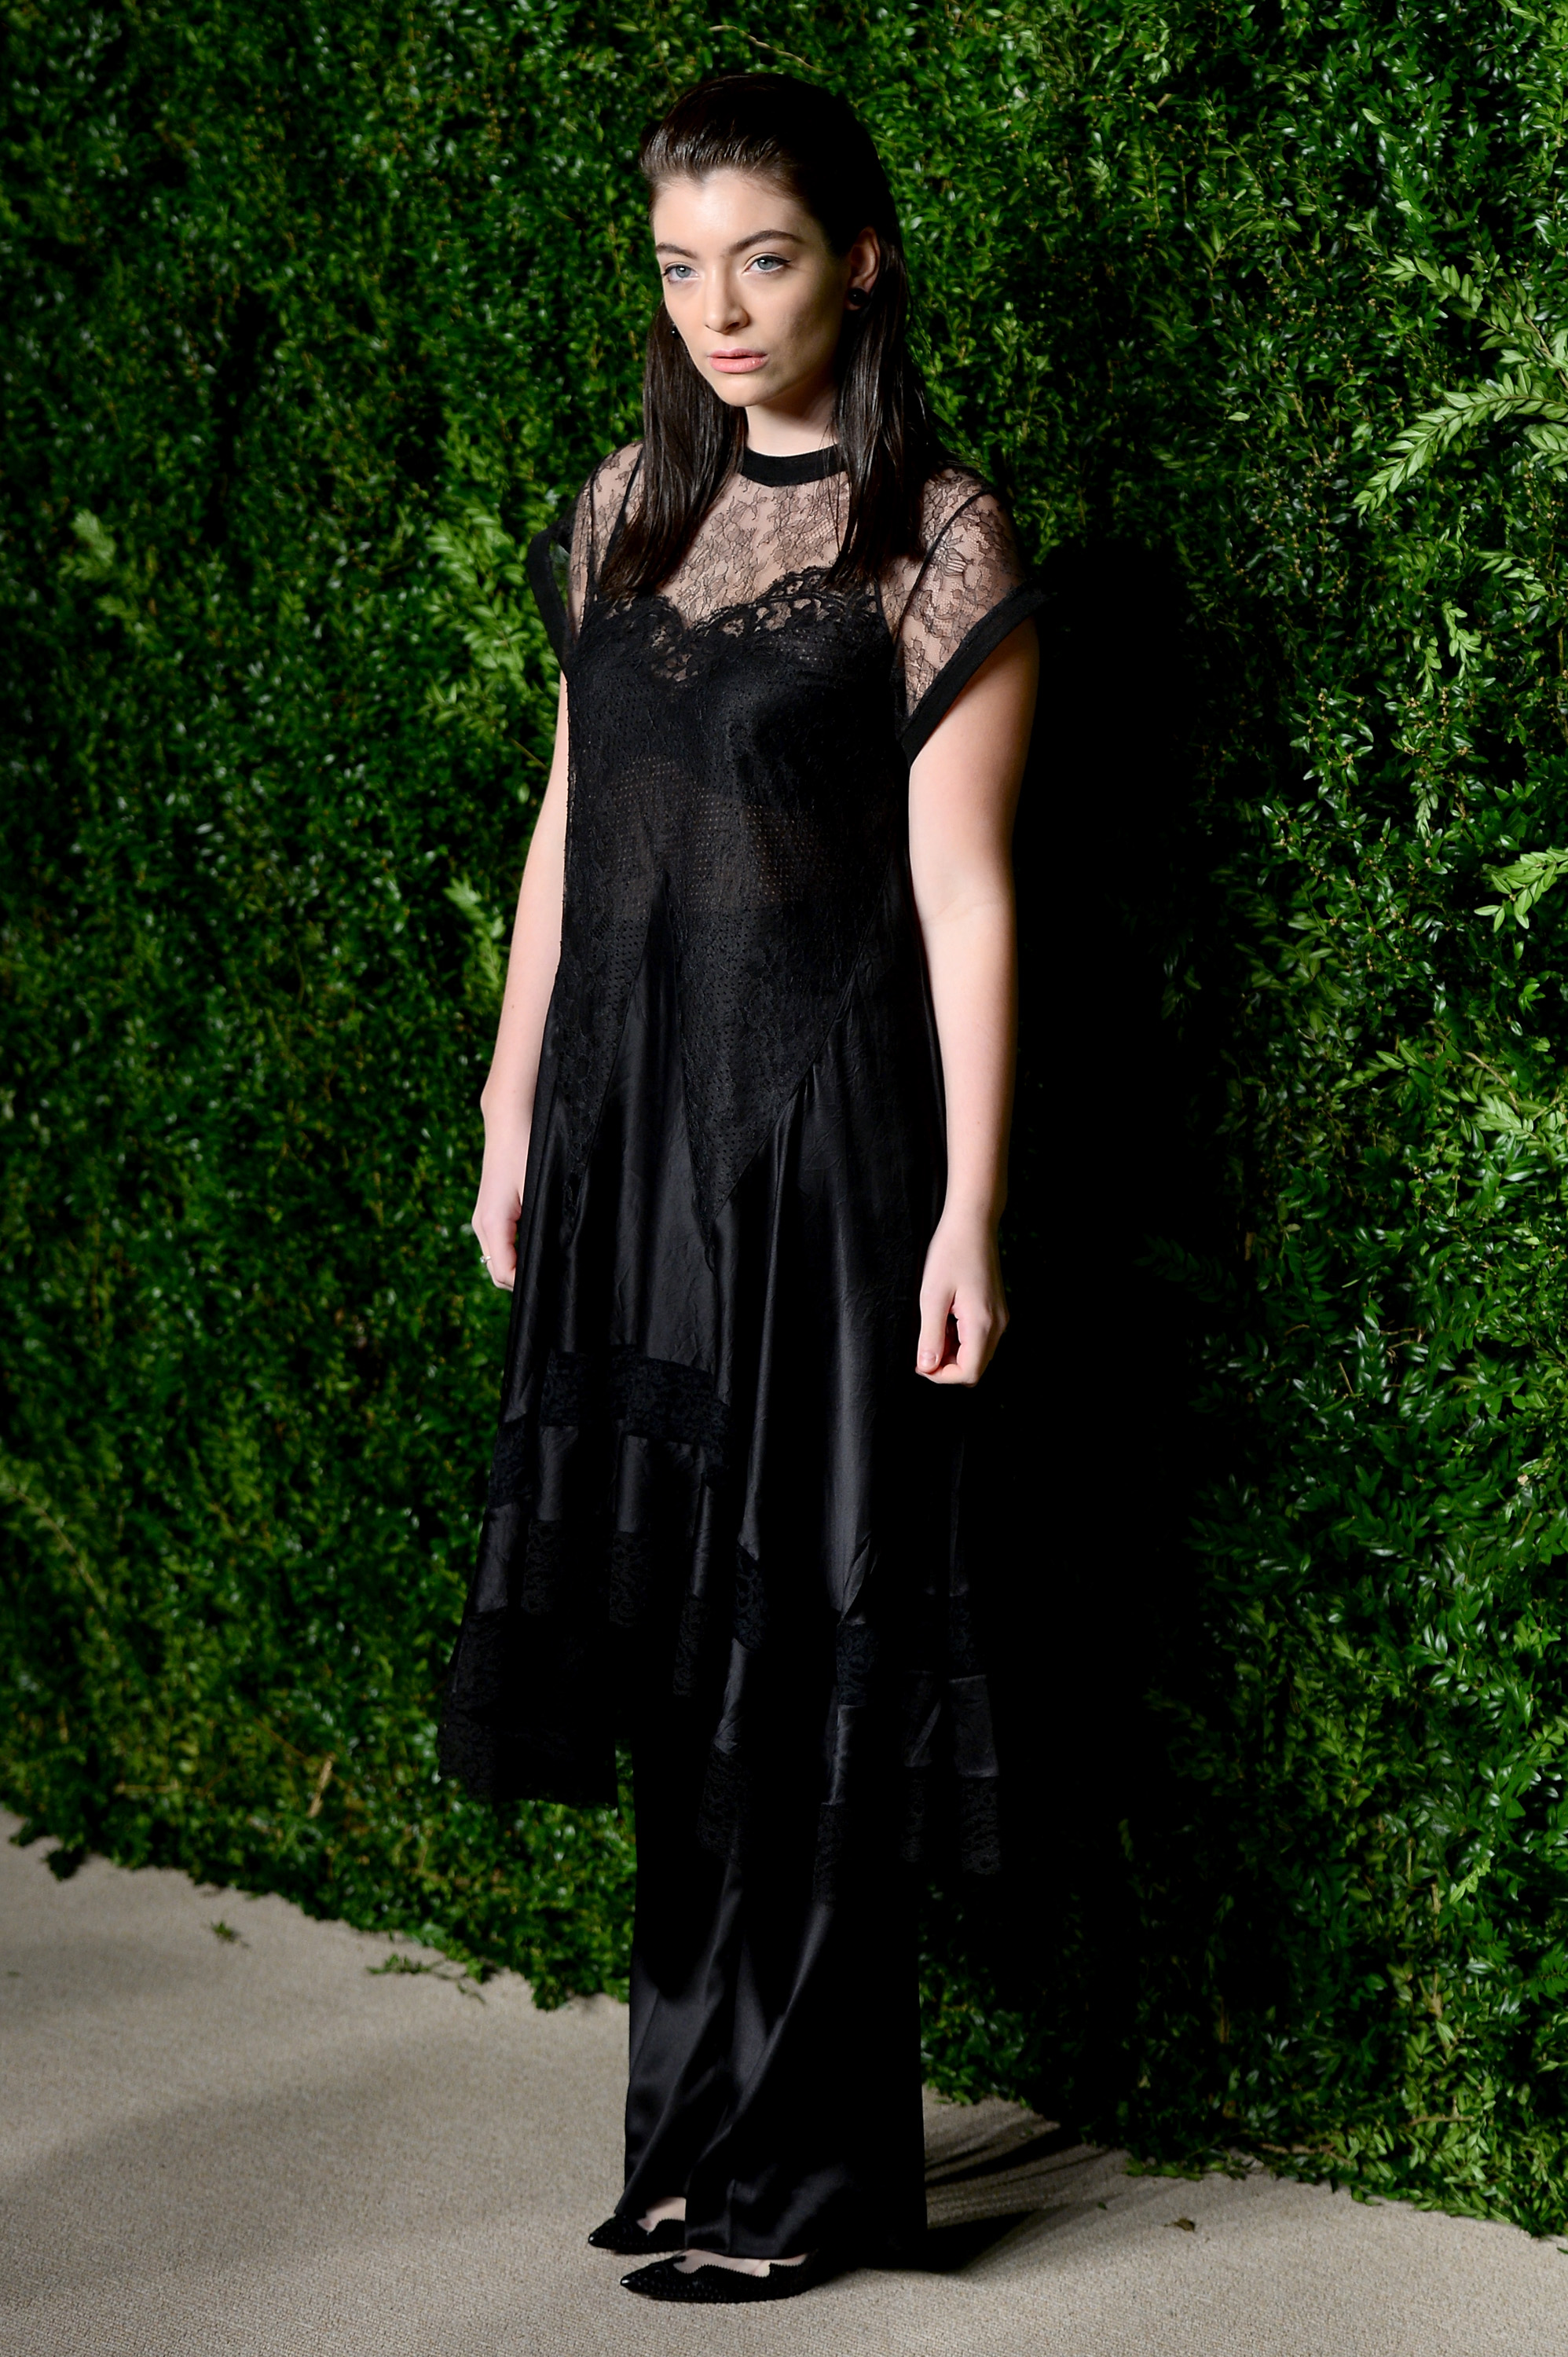 lorde posing at the cfda awards in a black lace dress 2015